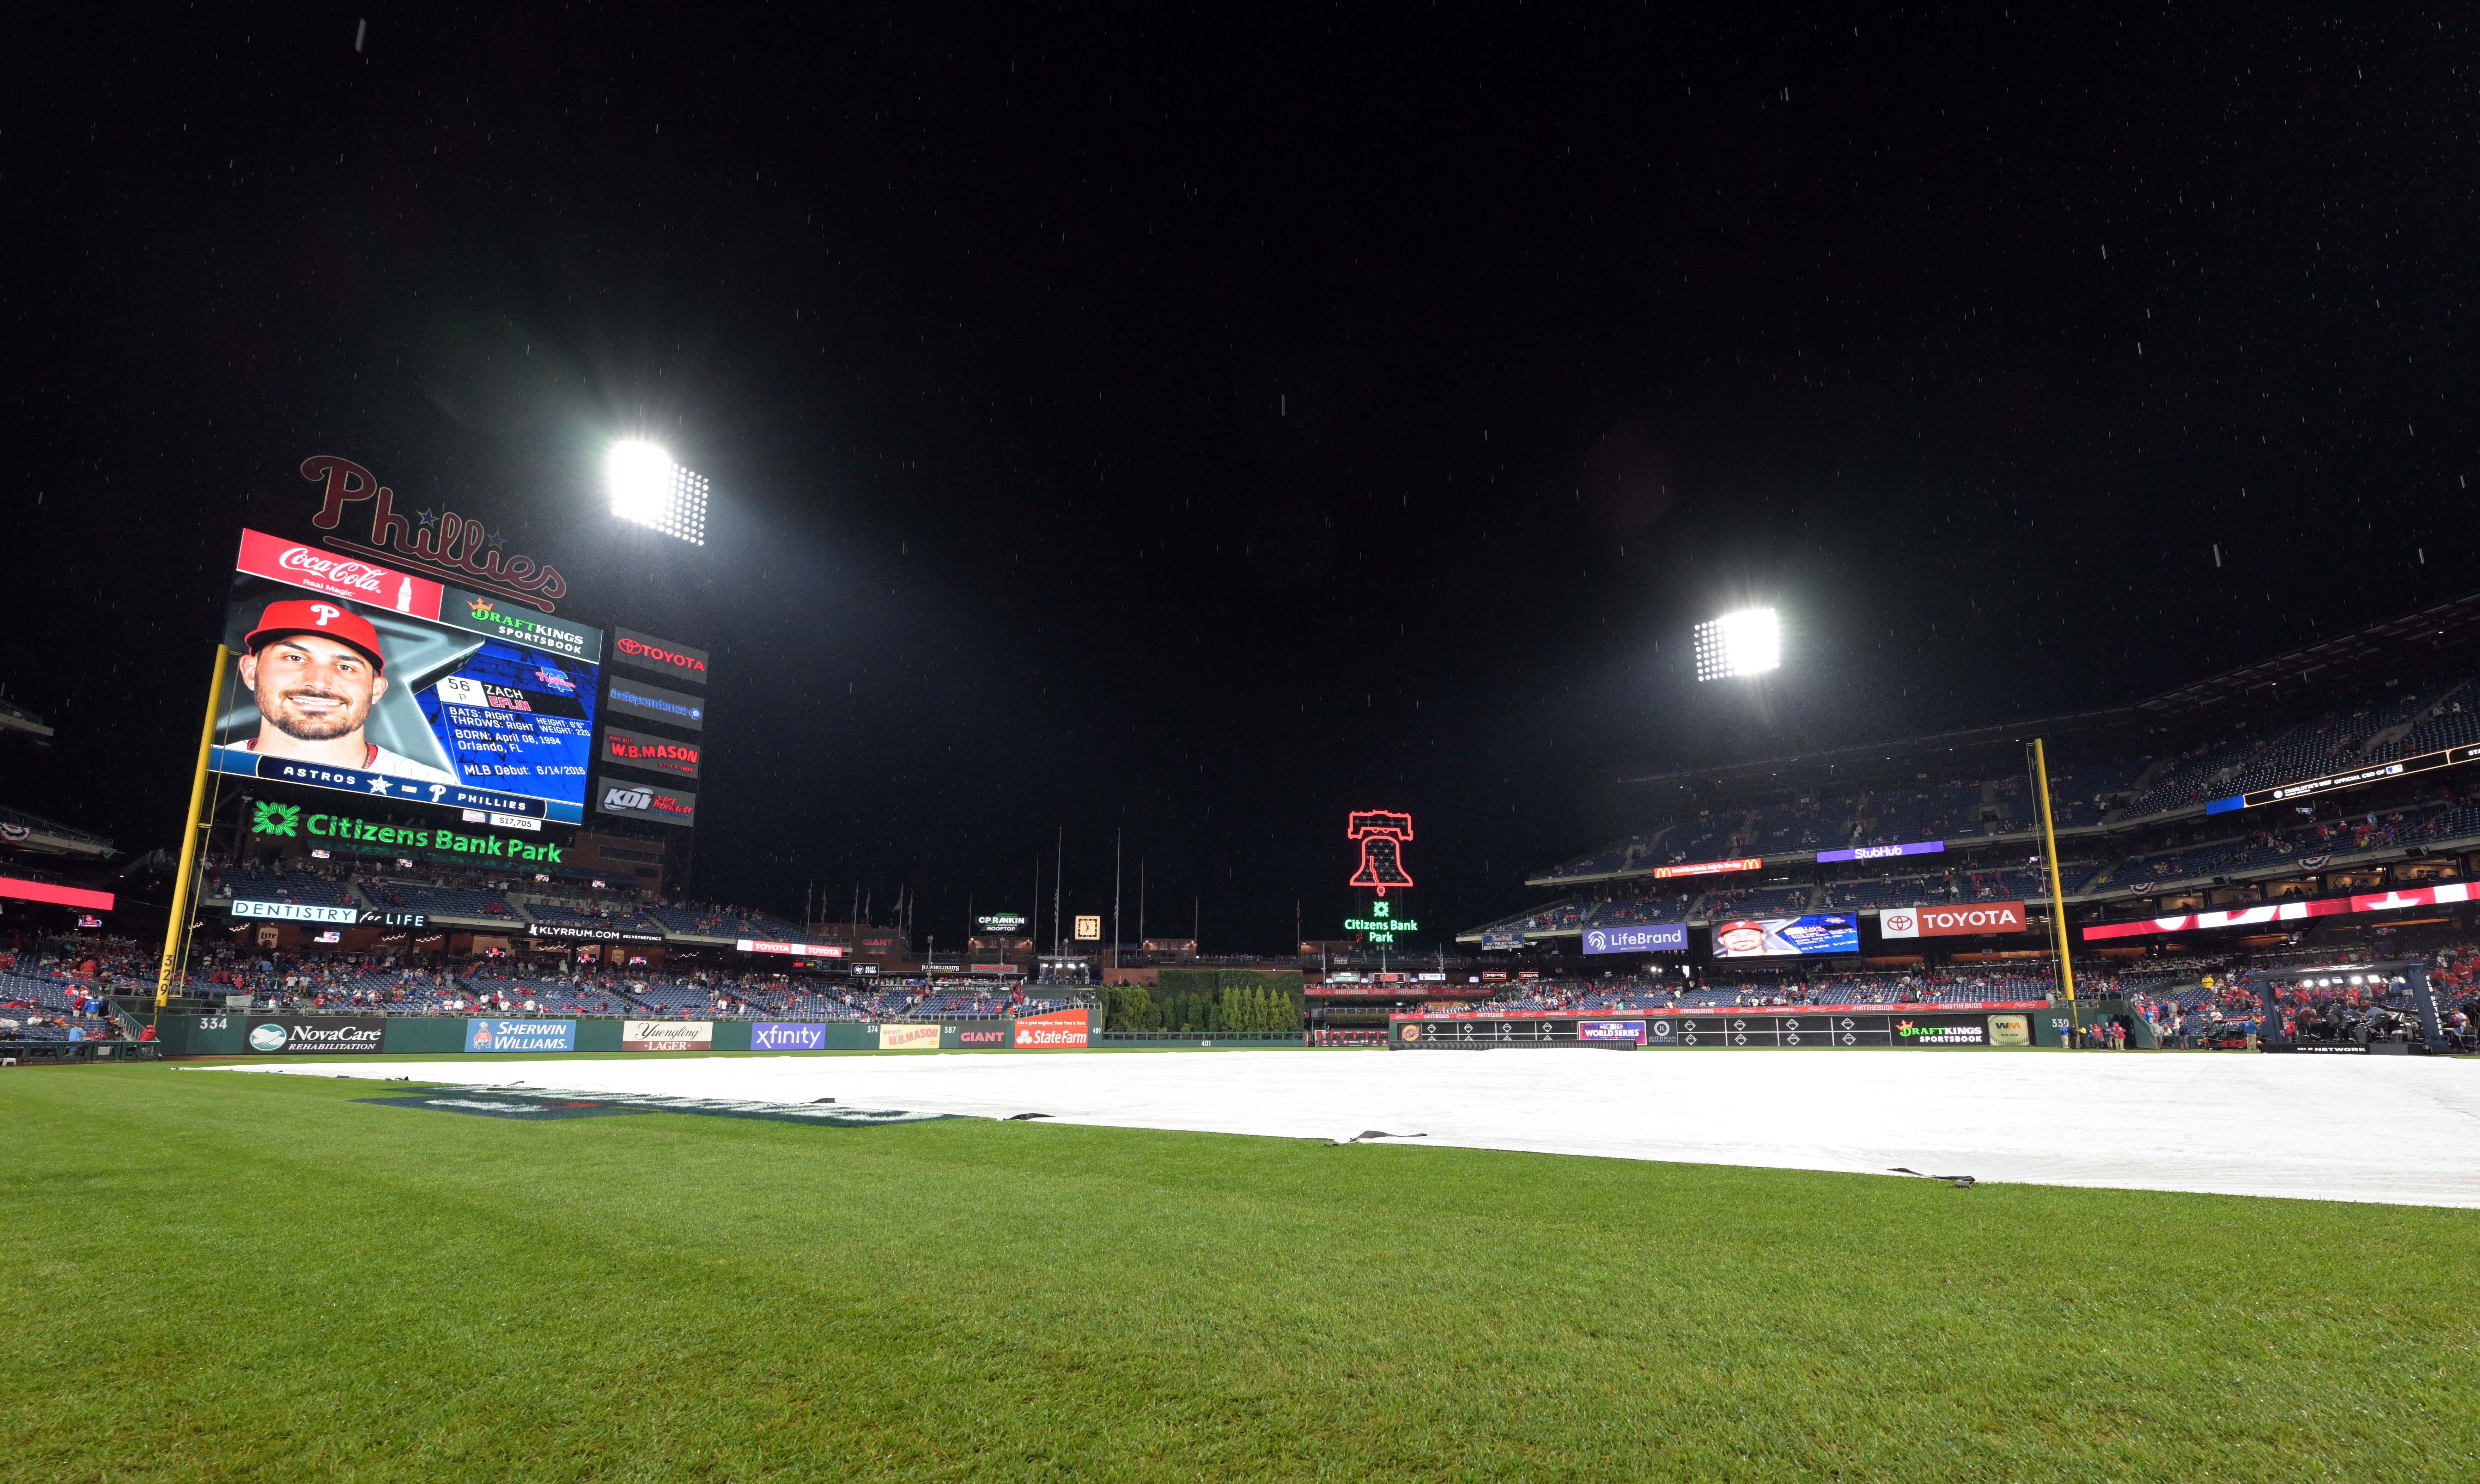 2022 World Series: Game 3 between Phillies-Astros postponed due to  inclement weather